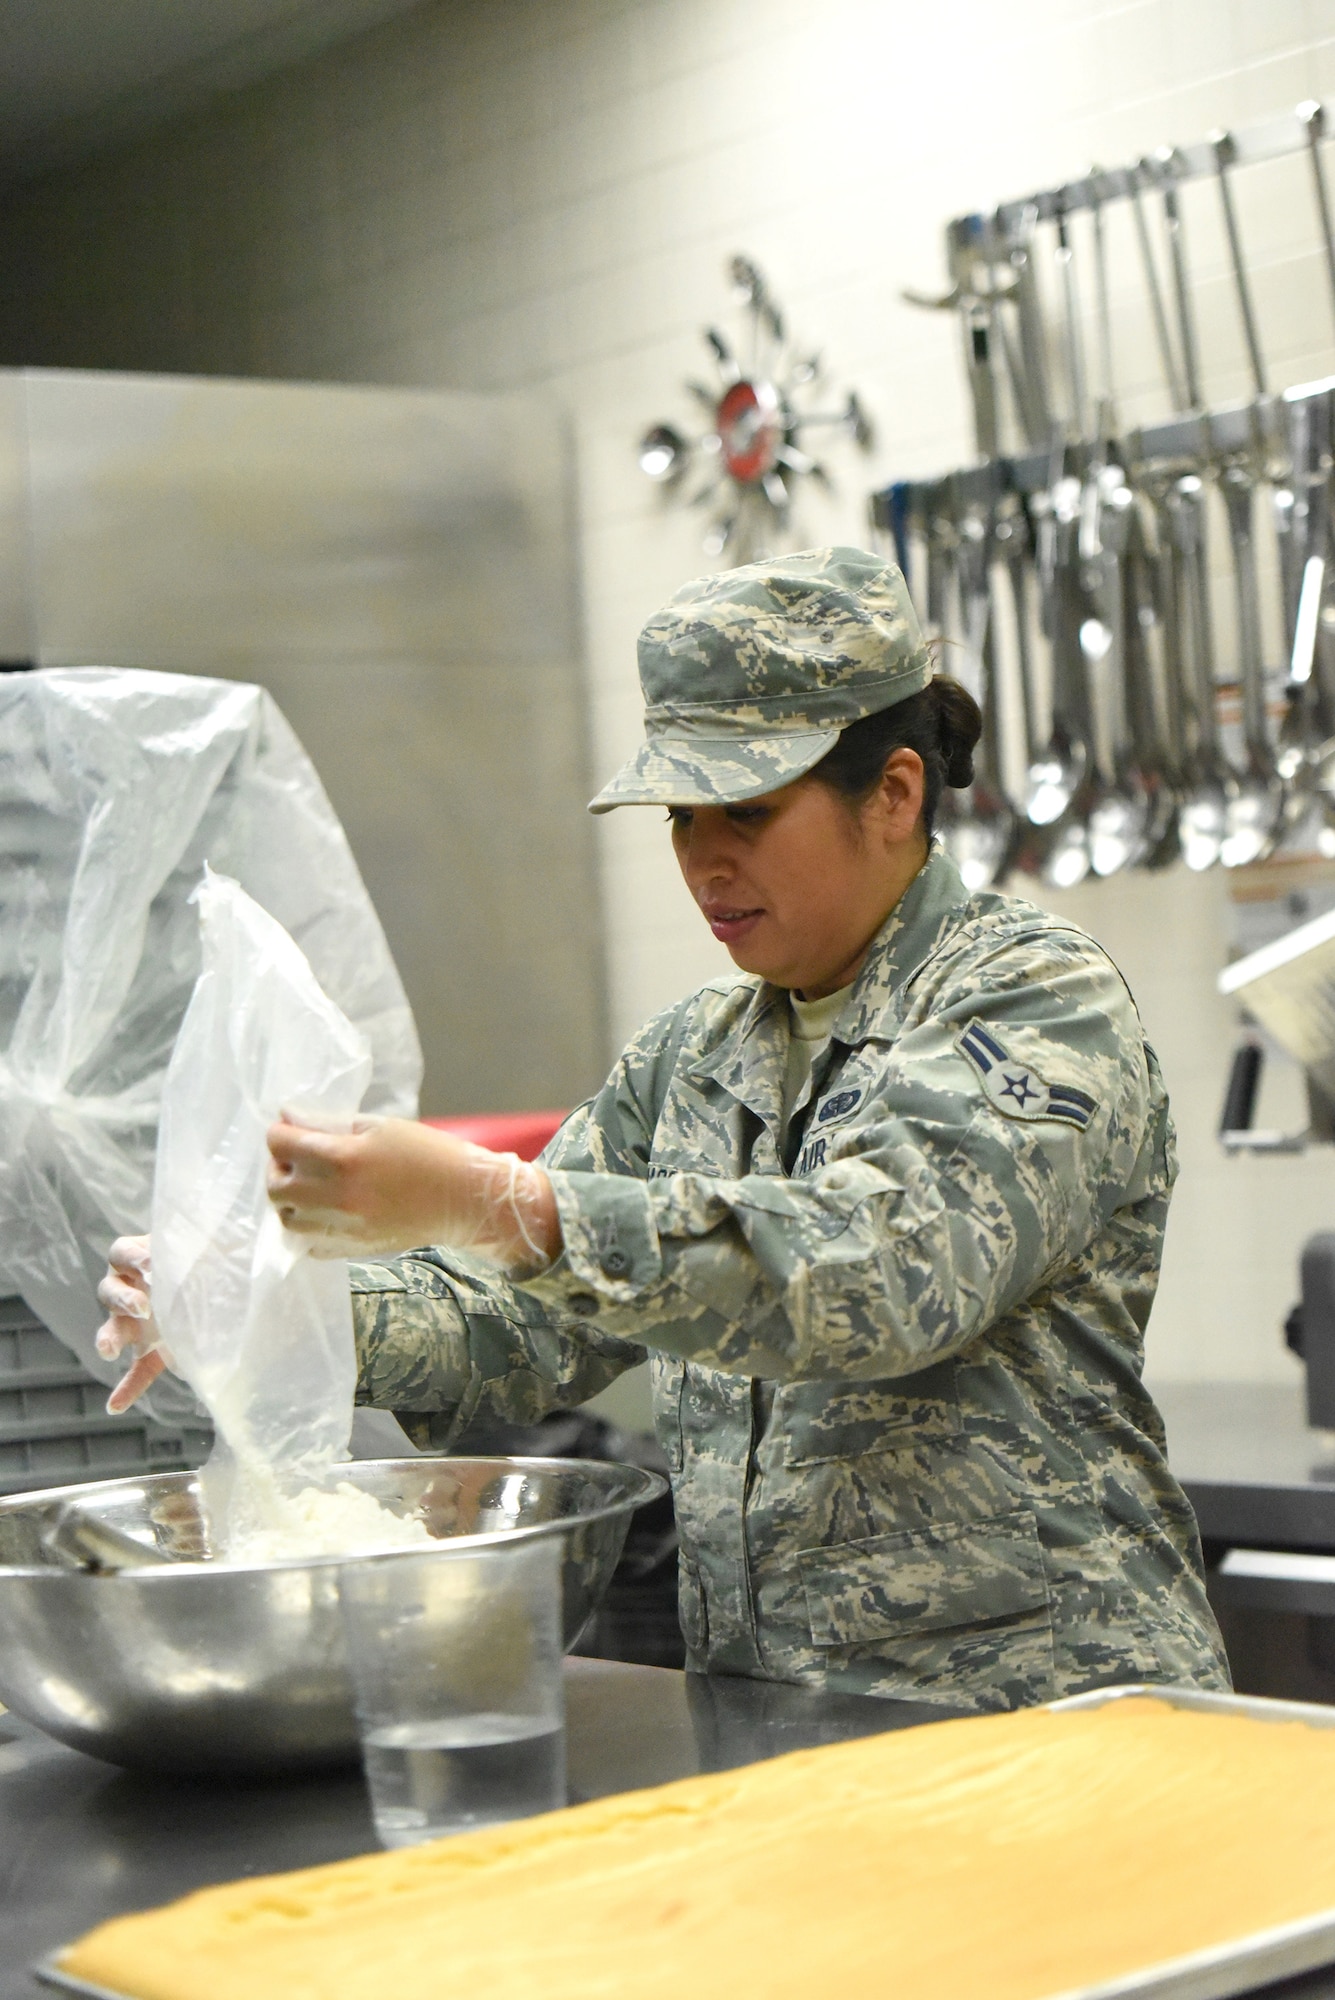 After baking a sheet cake, Airman 1st Class Michelle Mason, a cook for Kentucky Air National Guard’s 123rd Services Flight in Louisville, Kentucky, prepares the cake’s frosting June 6, 2017. Cakes, cookies and brownies are just some of the many desserts prepared in the base dining facility kitchen. The 123rd Services Flight recently was recognized as the best food service organization in the Air National Guard. (U.S. Air National Guard photo by Tech. Sgt. Vicky Spesard)